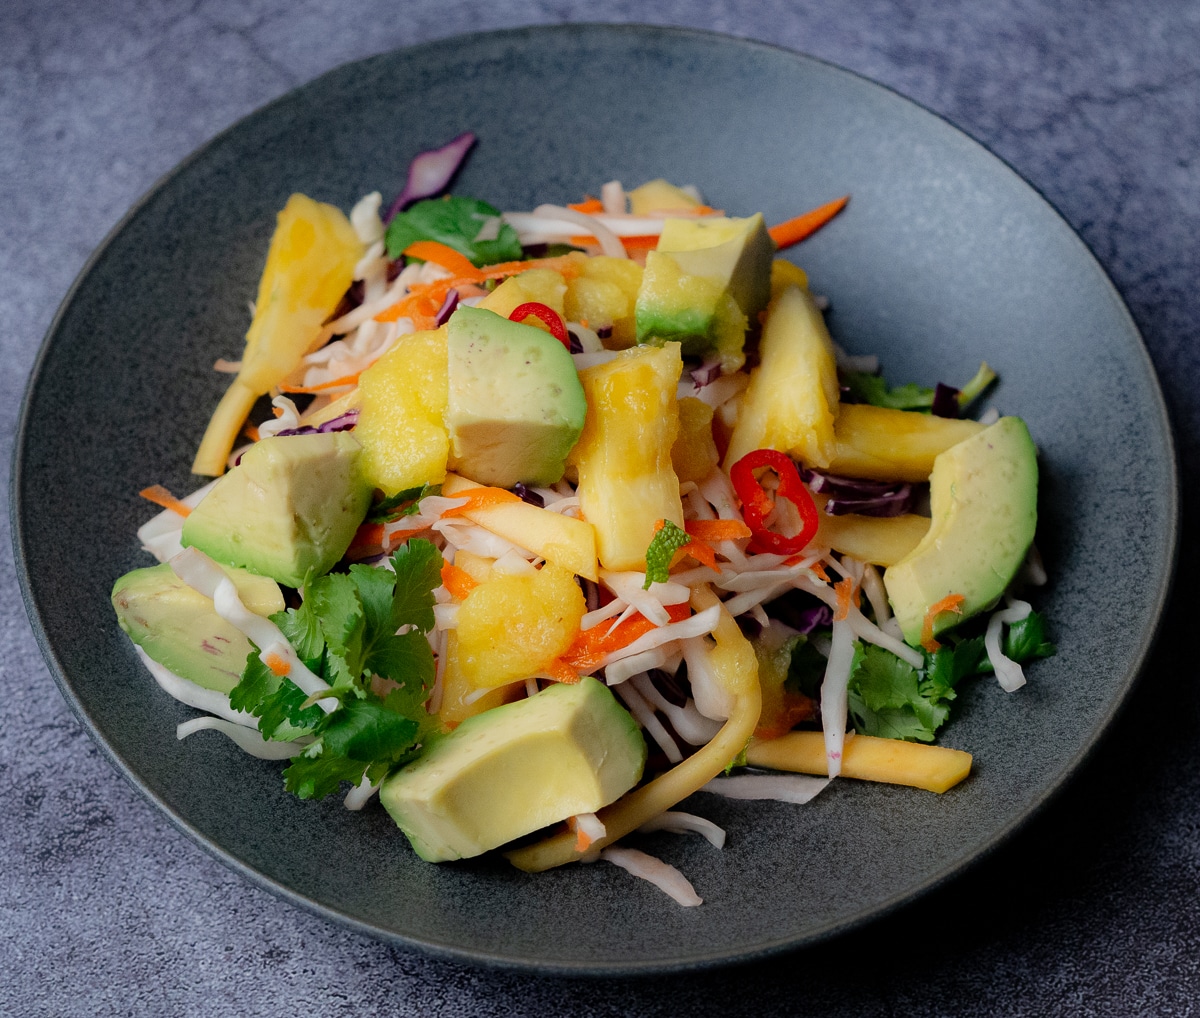 Coleslaw with pineapple , avocado and chilli slices in a black salad bowl